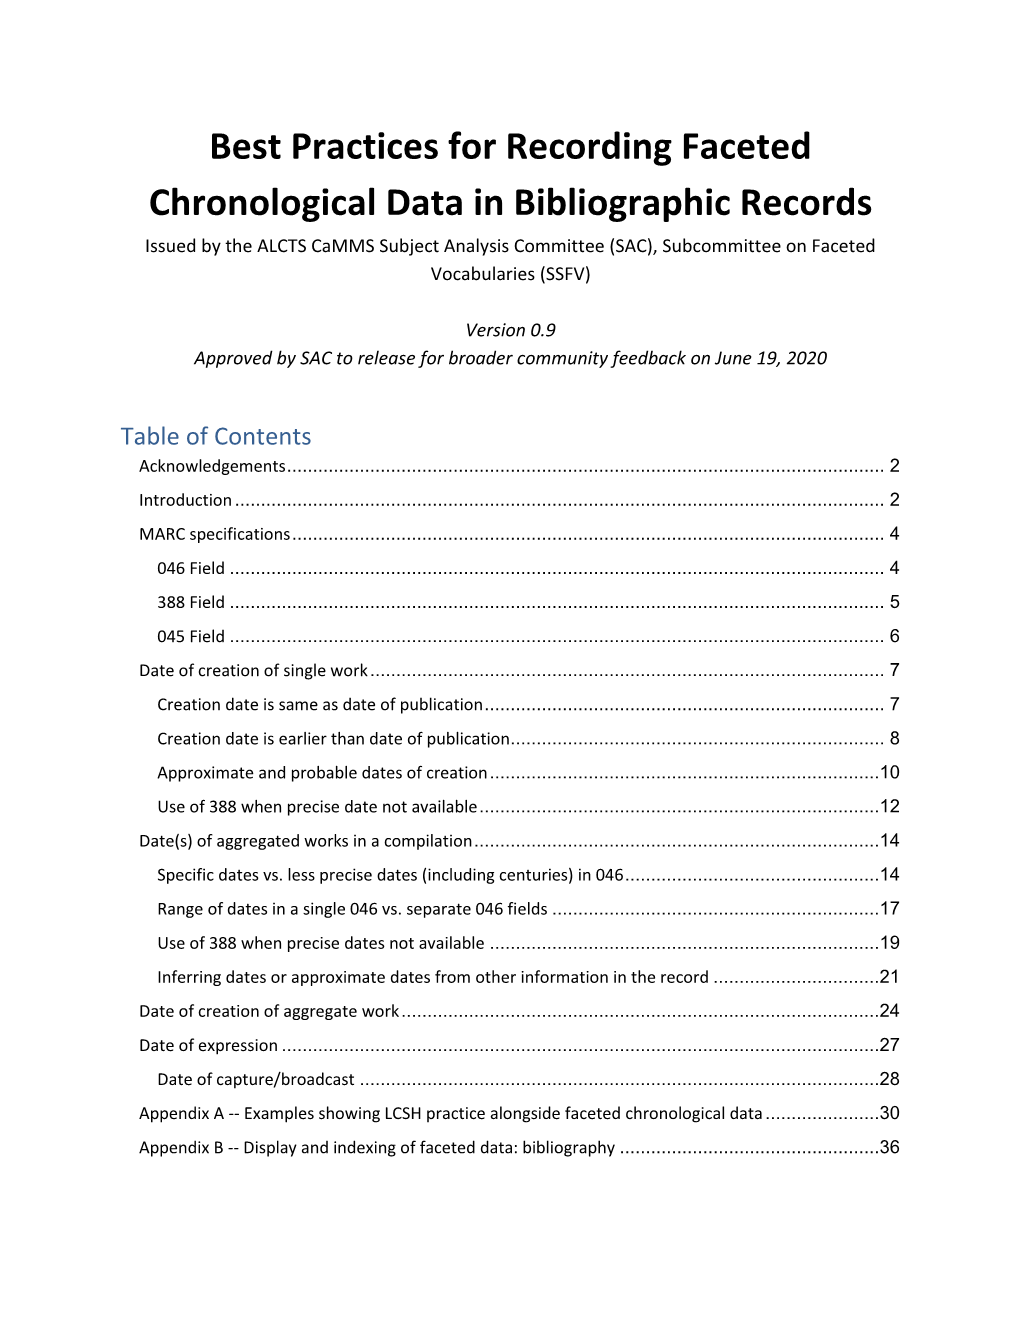 Best Practices for Recording Faceted Chronological Data in Bibliographic Records